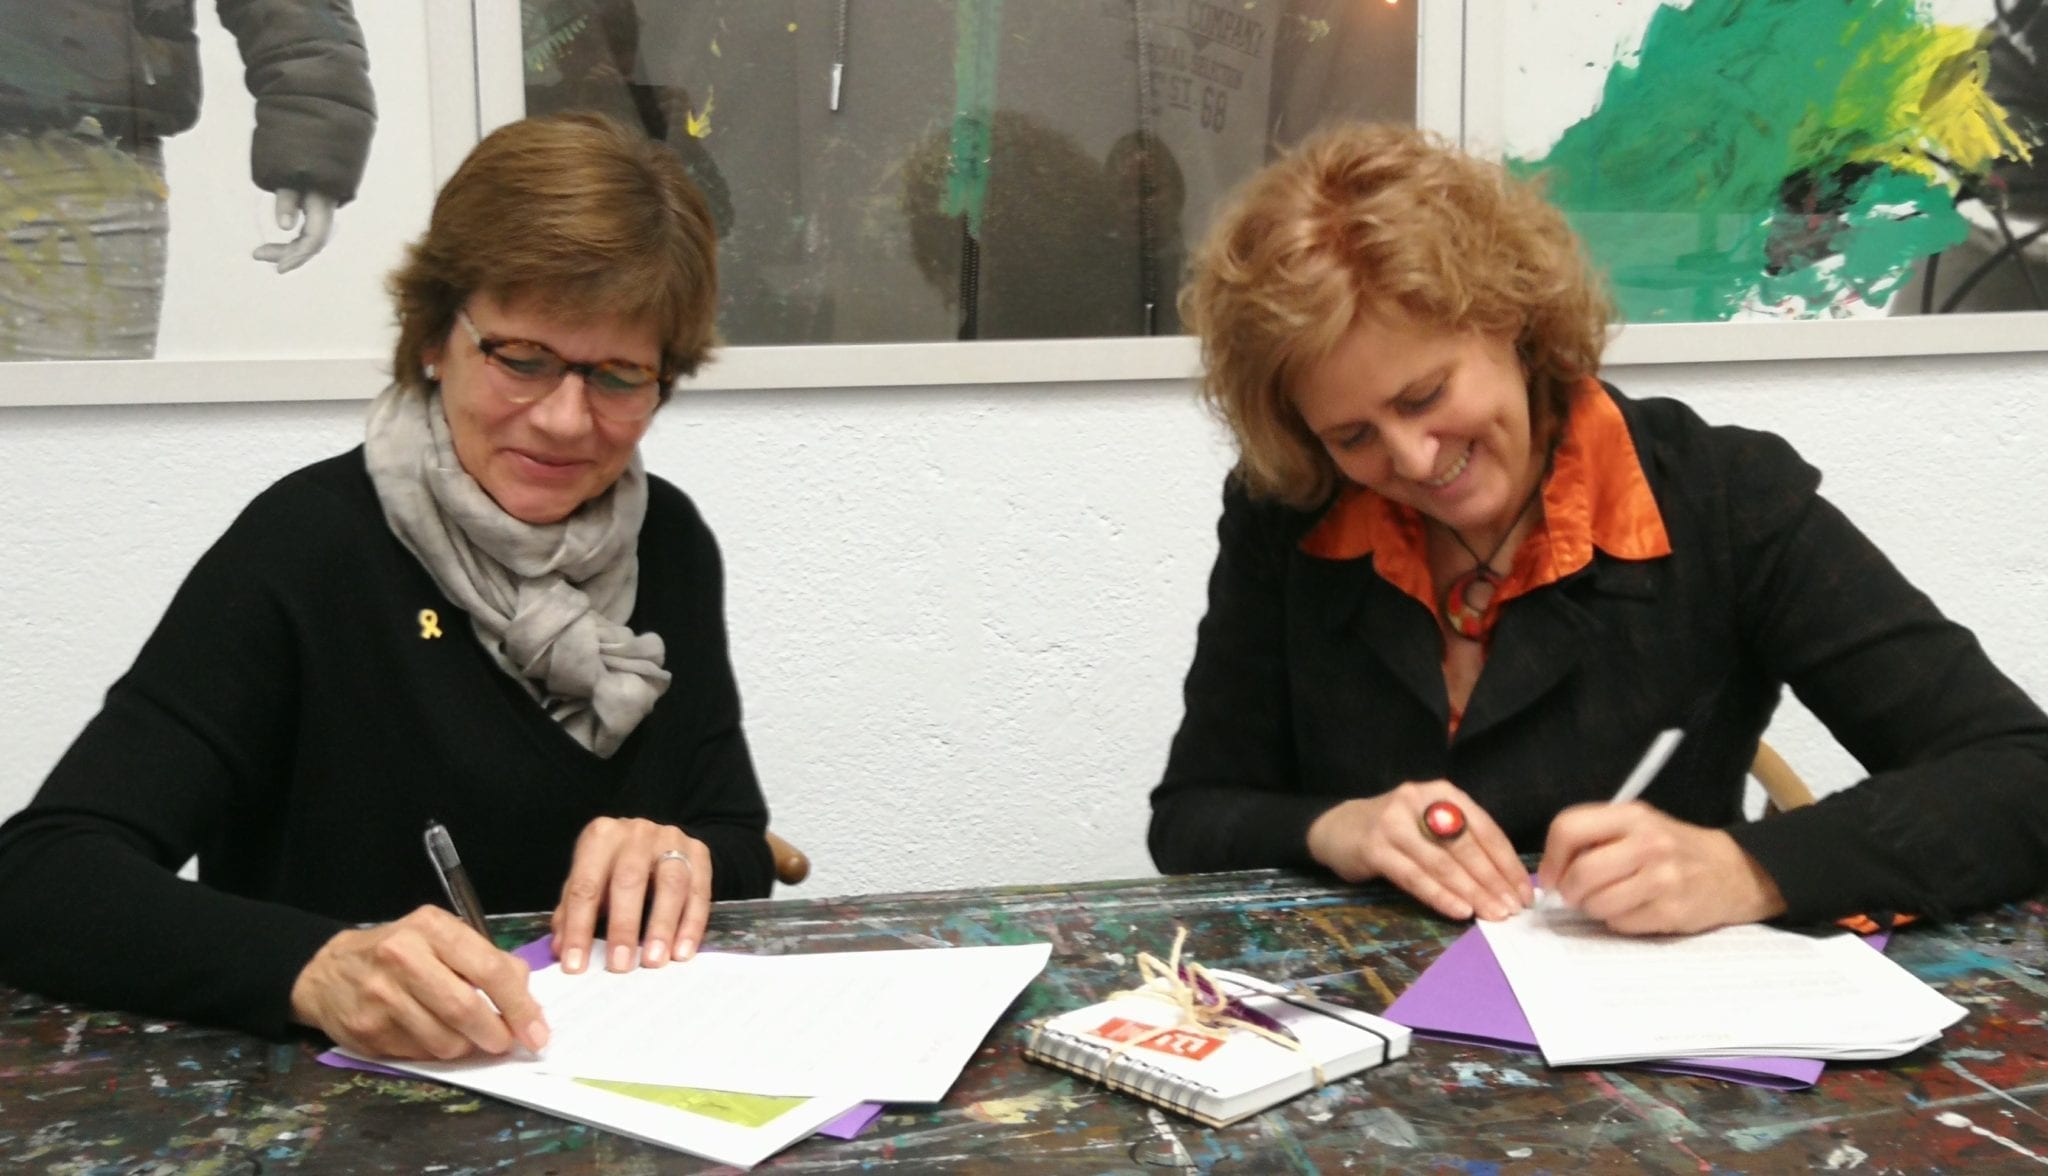 Collaboration agreement with the Grífols Foundation to strengthen the ethical perspective of our projects